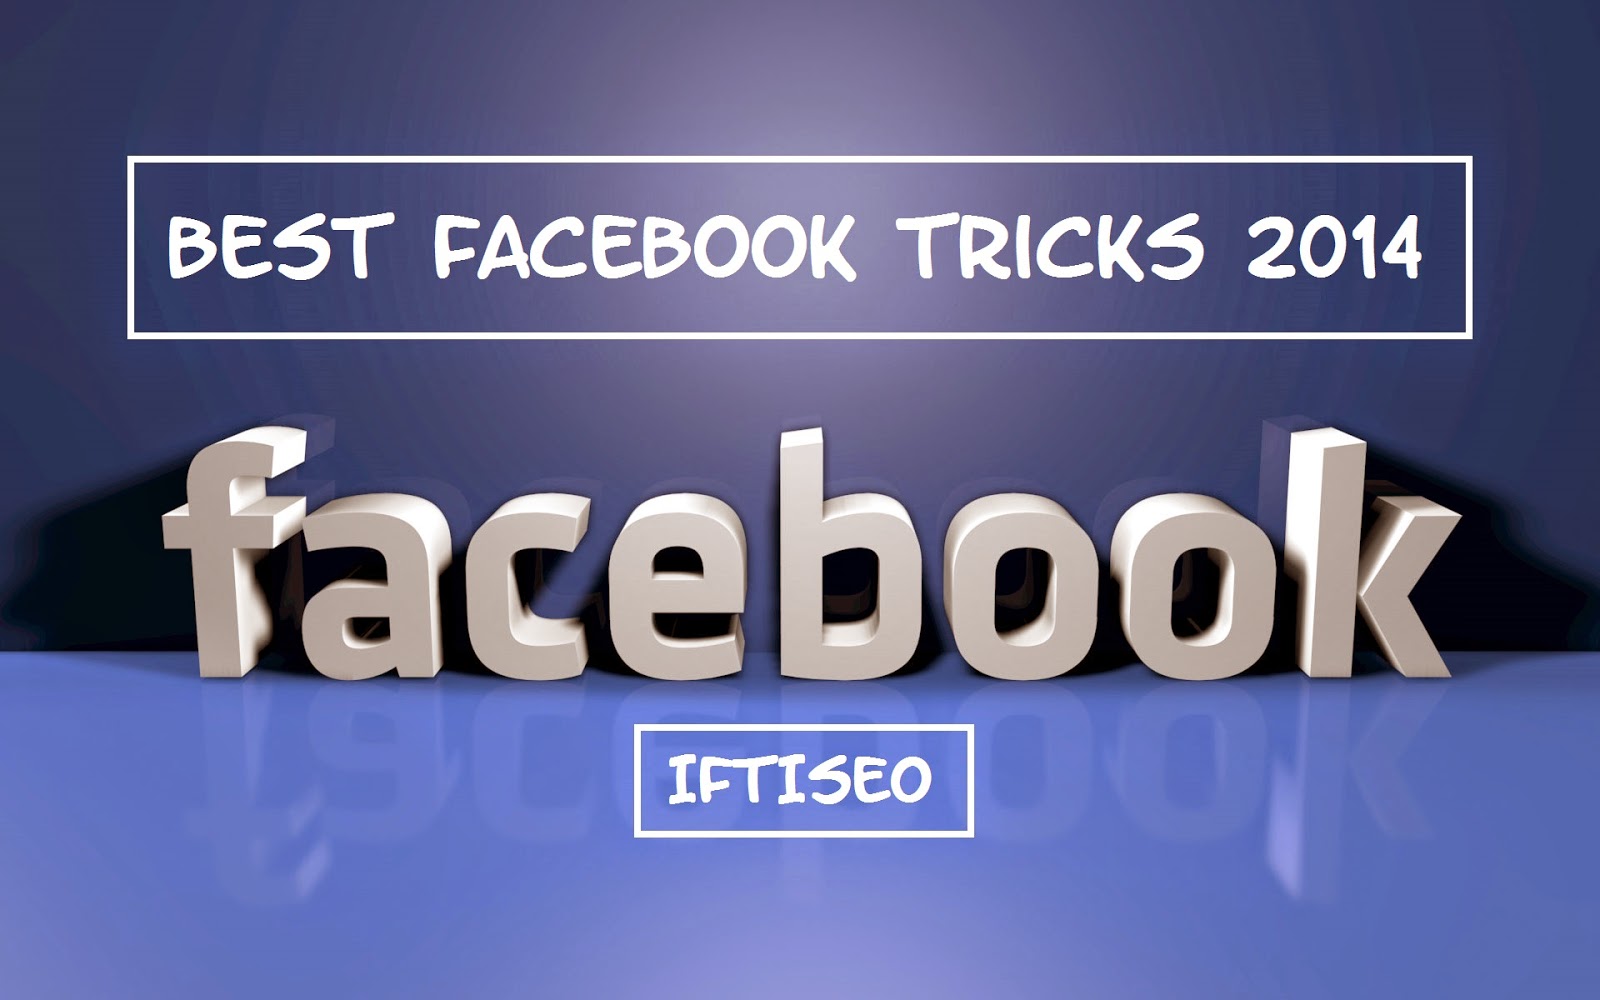 2014 Cool Facebook Tricks You have Been Waiting For.